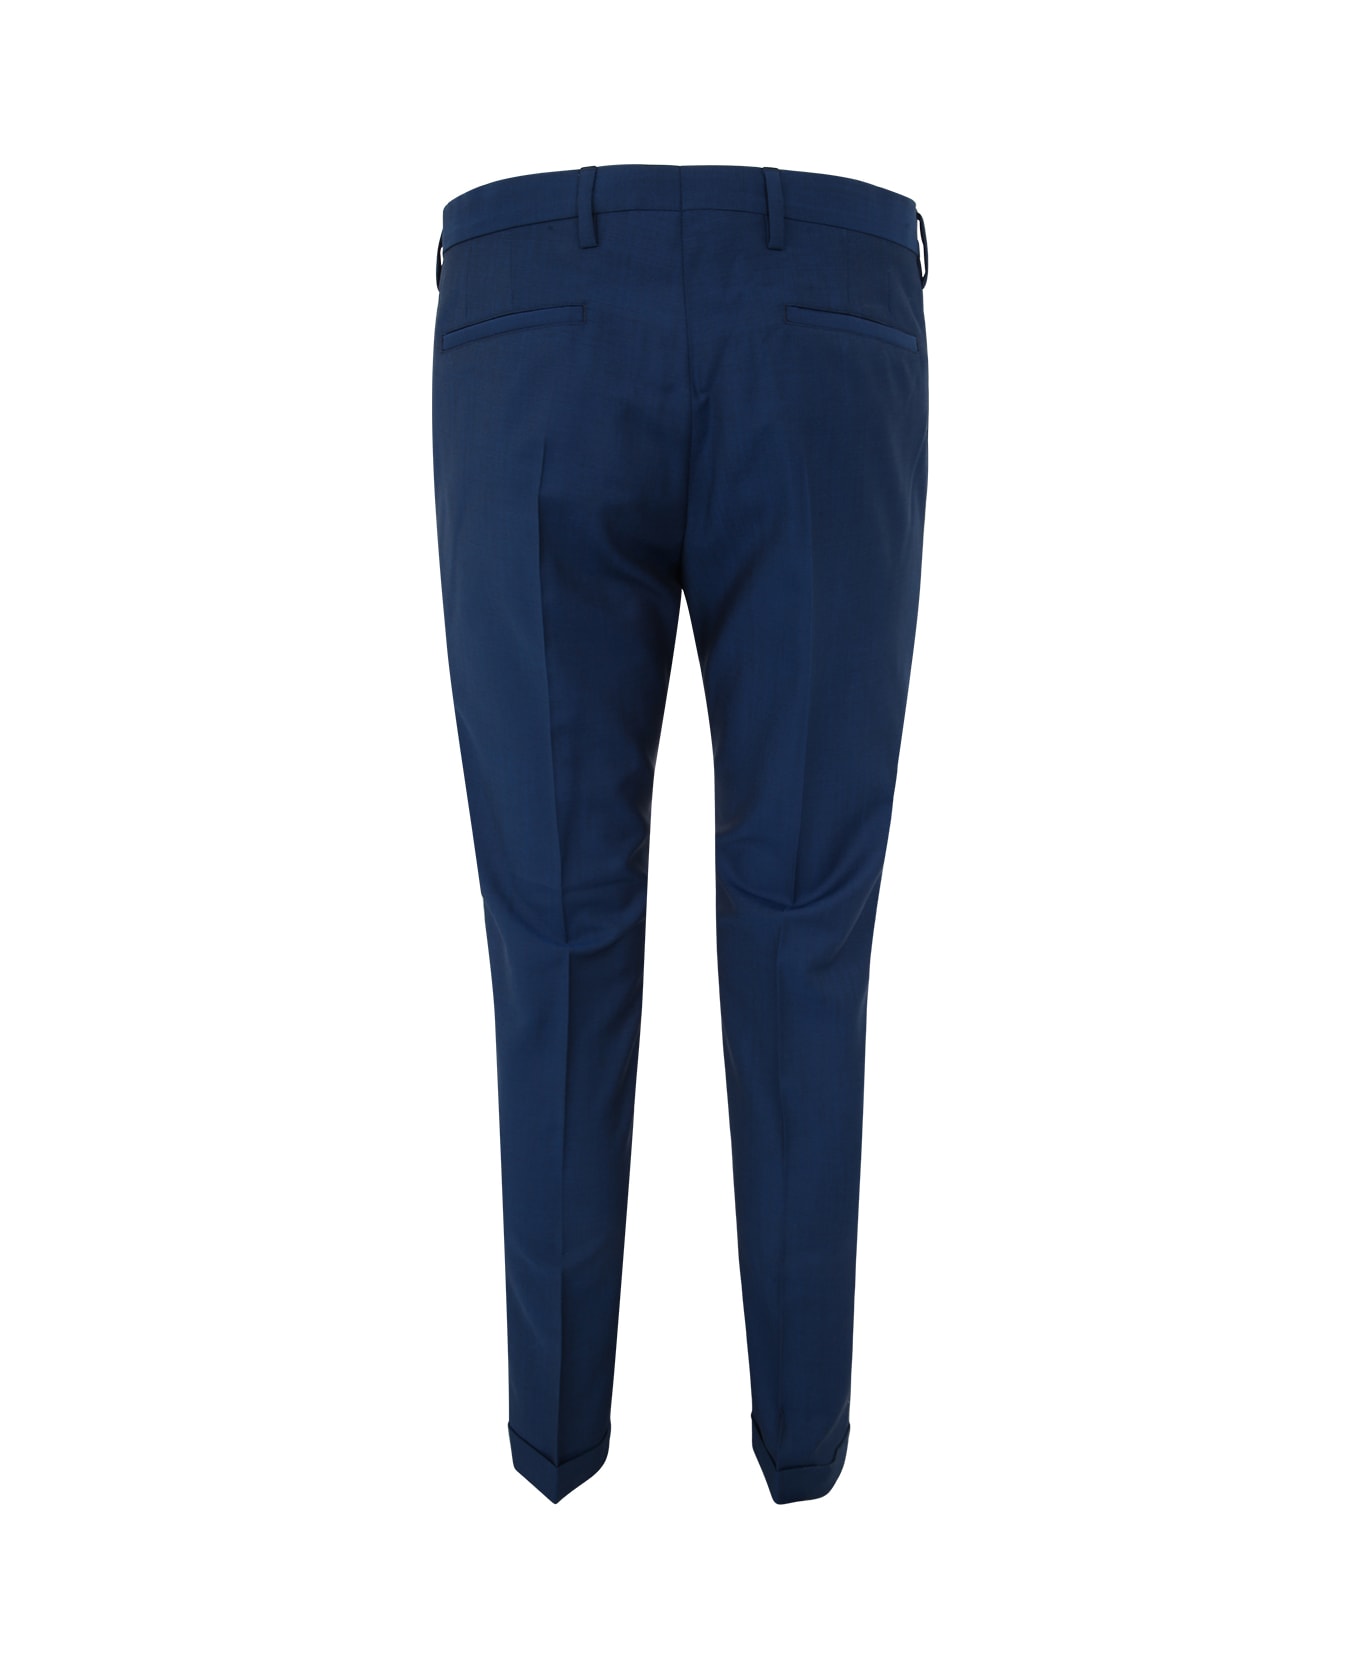 Paul Smith Mens Trousers - Blue ボトムス